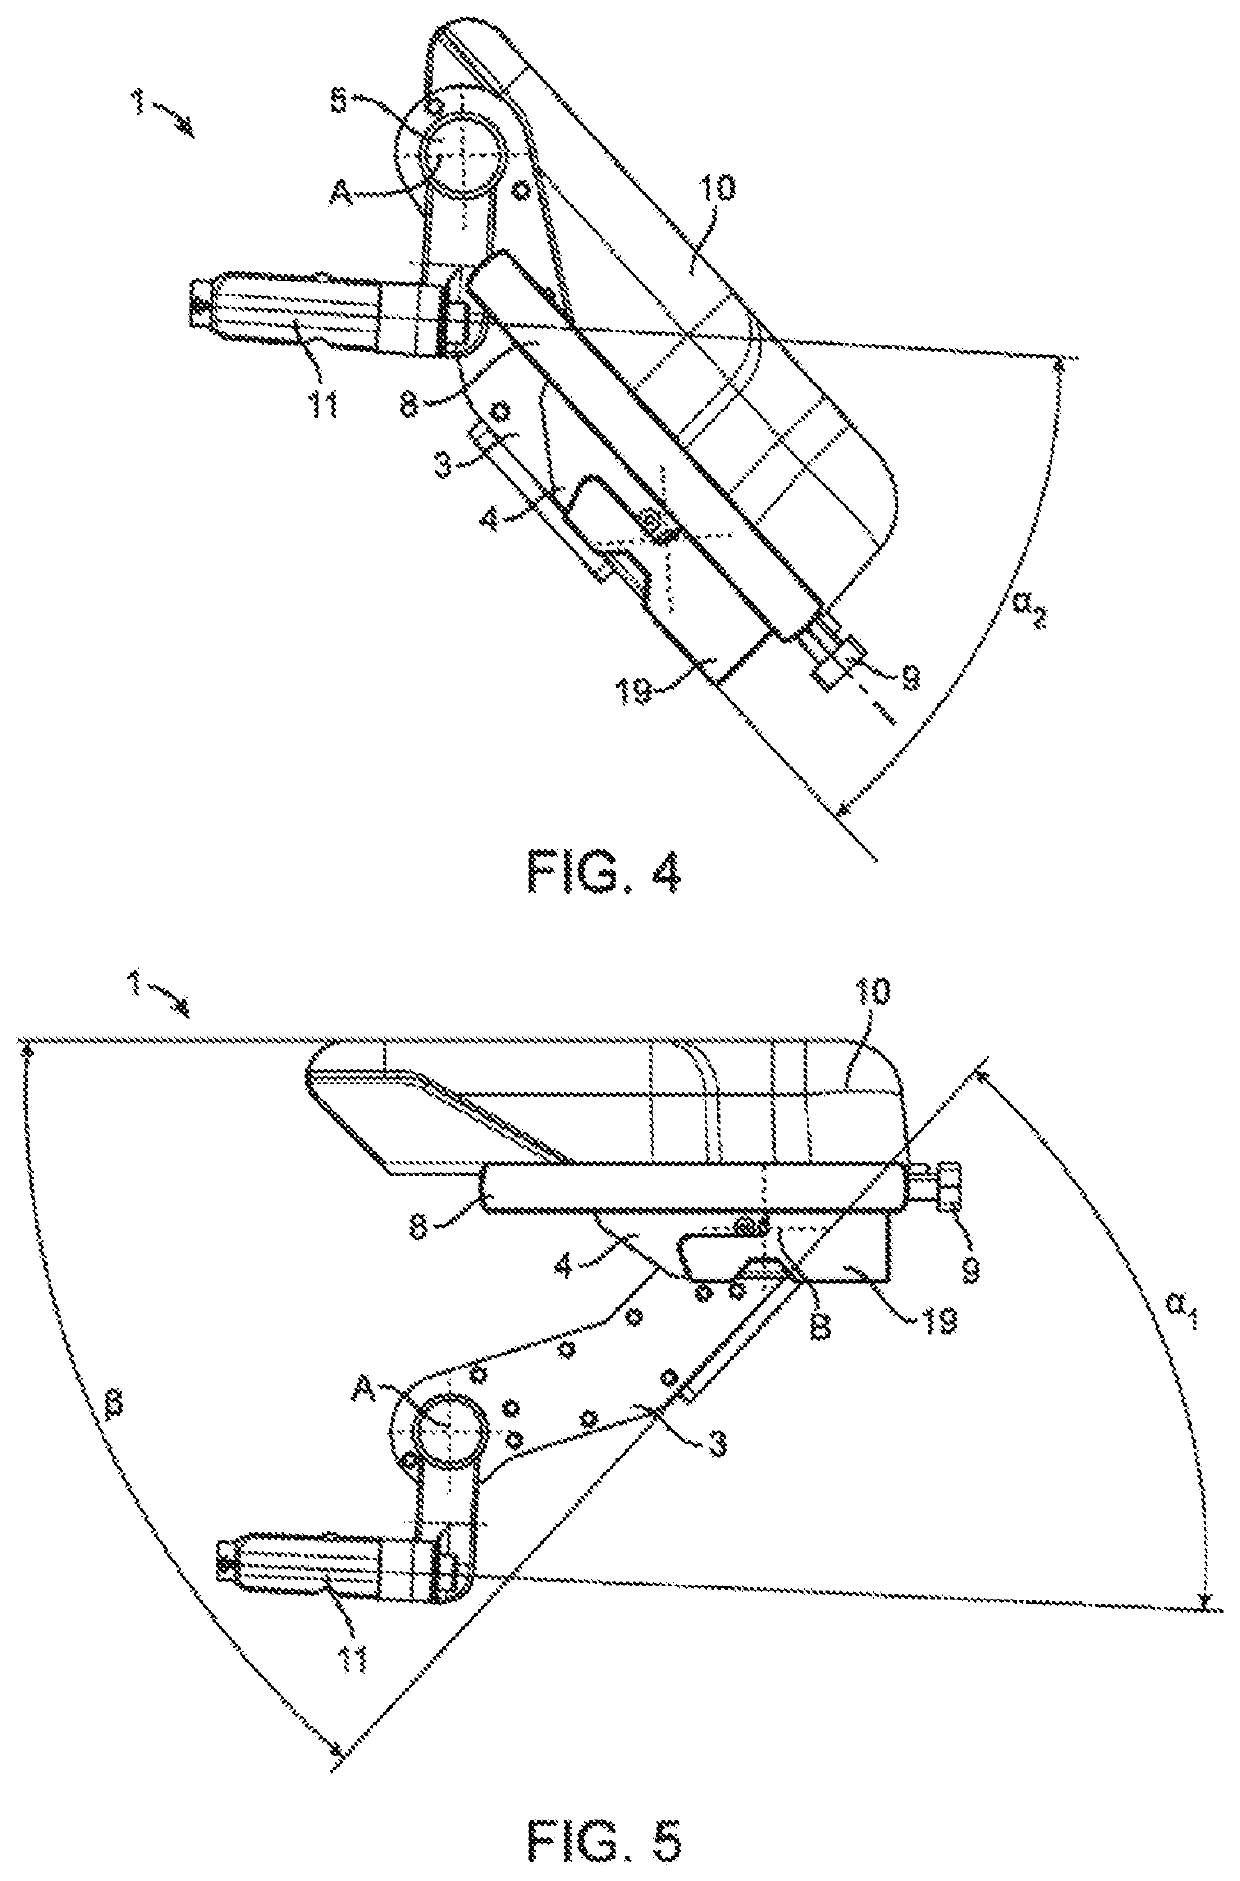 Head plate provided for an operating table and adjustable with one hand